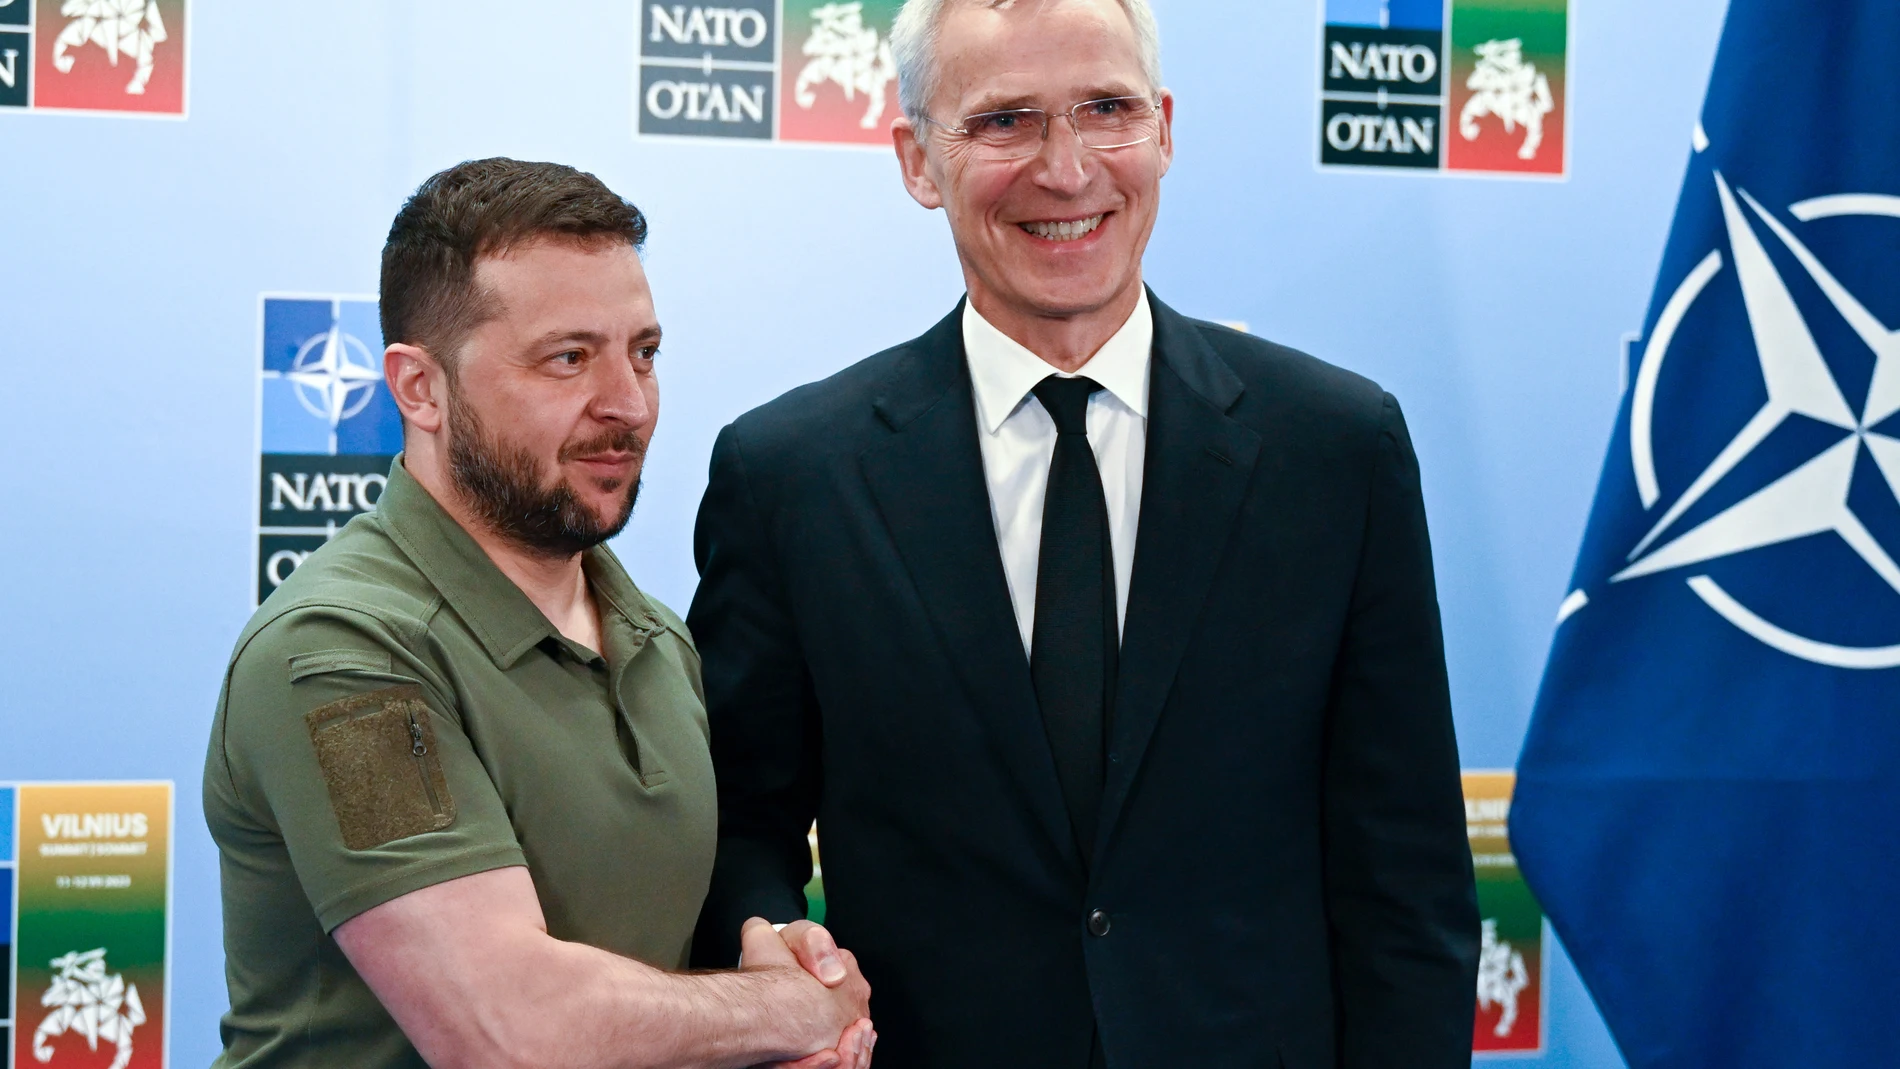 Vilnius (Lithuania), 12/07/2023.- NATO Secretary General Jens Stoltenberg (R) and Ukraine's President Volodymyr Zelensky shake hands before a bilateral meeting, at the NATO ?summit in Vilnius, Lithuania, 12 July 2023. The North Atlantic Treaty Organization (NATO) Summit takes place in Vilnius on 11 and 12 July 2023 with the alliance's leaders expected to adopt new defense plans. (Lituania, Ucrania) EFE/EPA/FILIP SINGER 